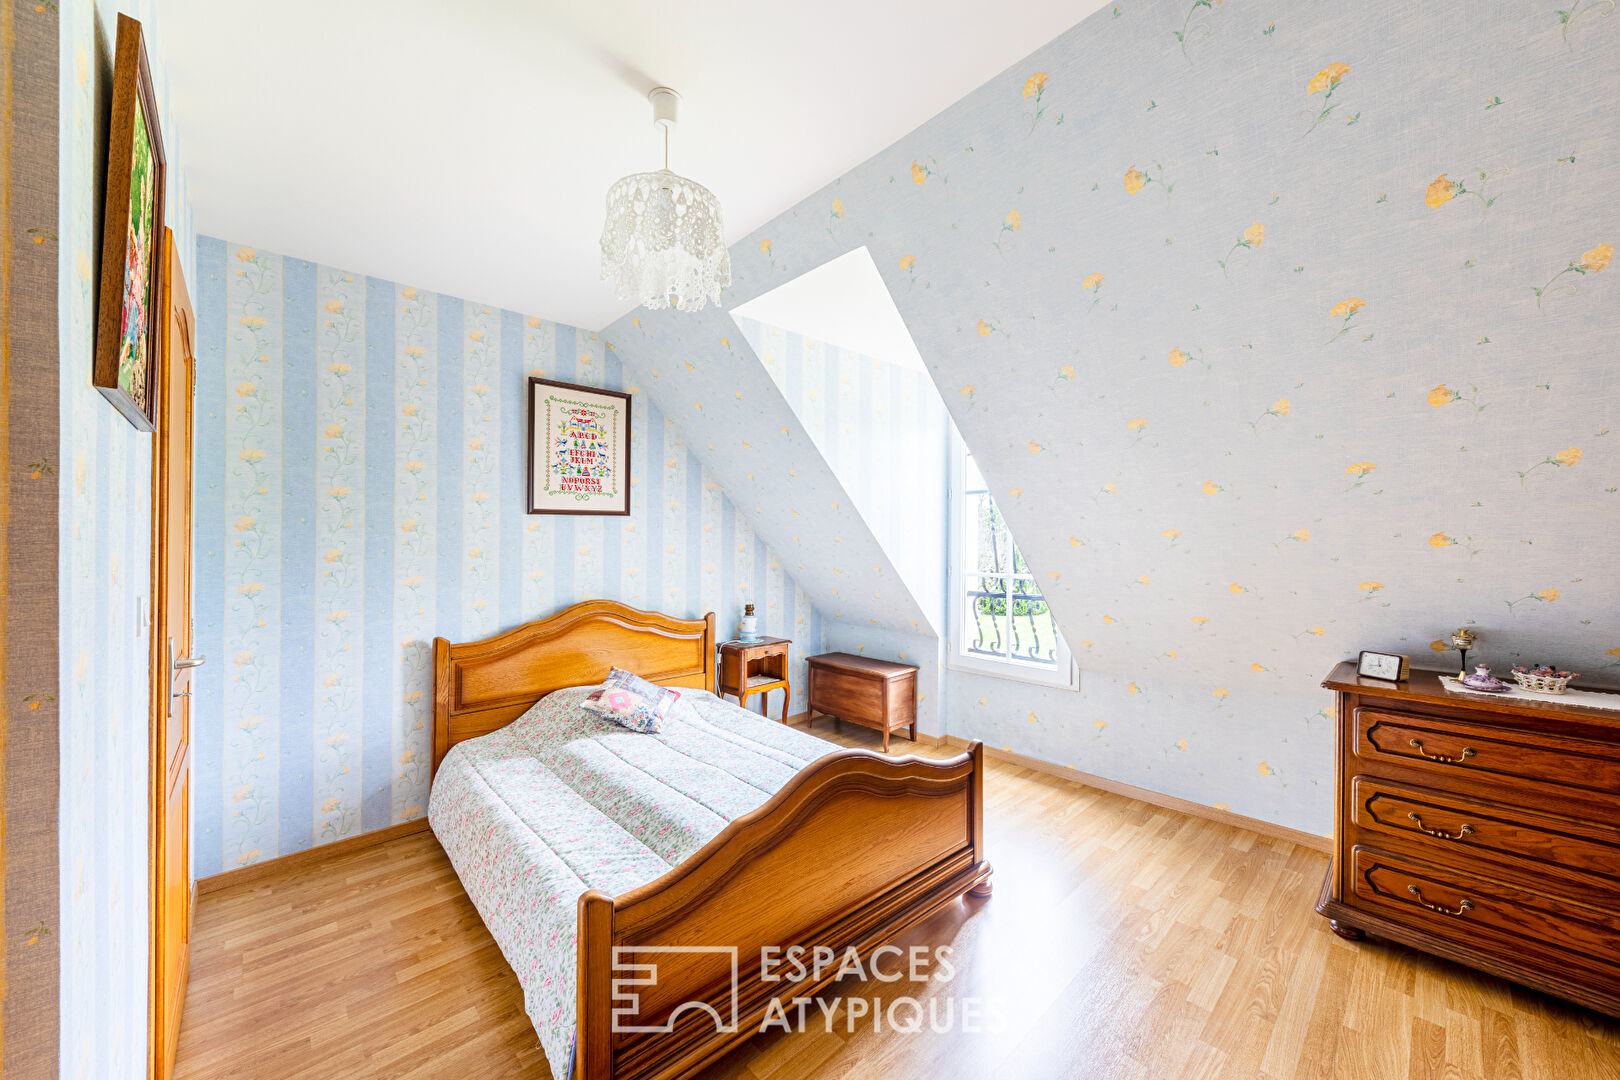 Economical and comfortable house with full basement in Saint-Sulpice